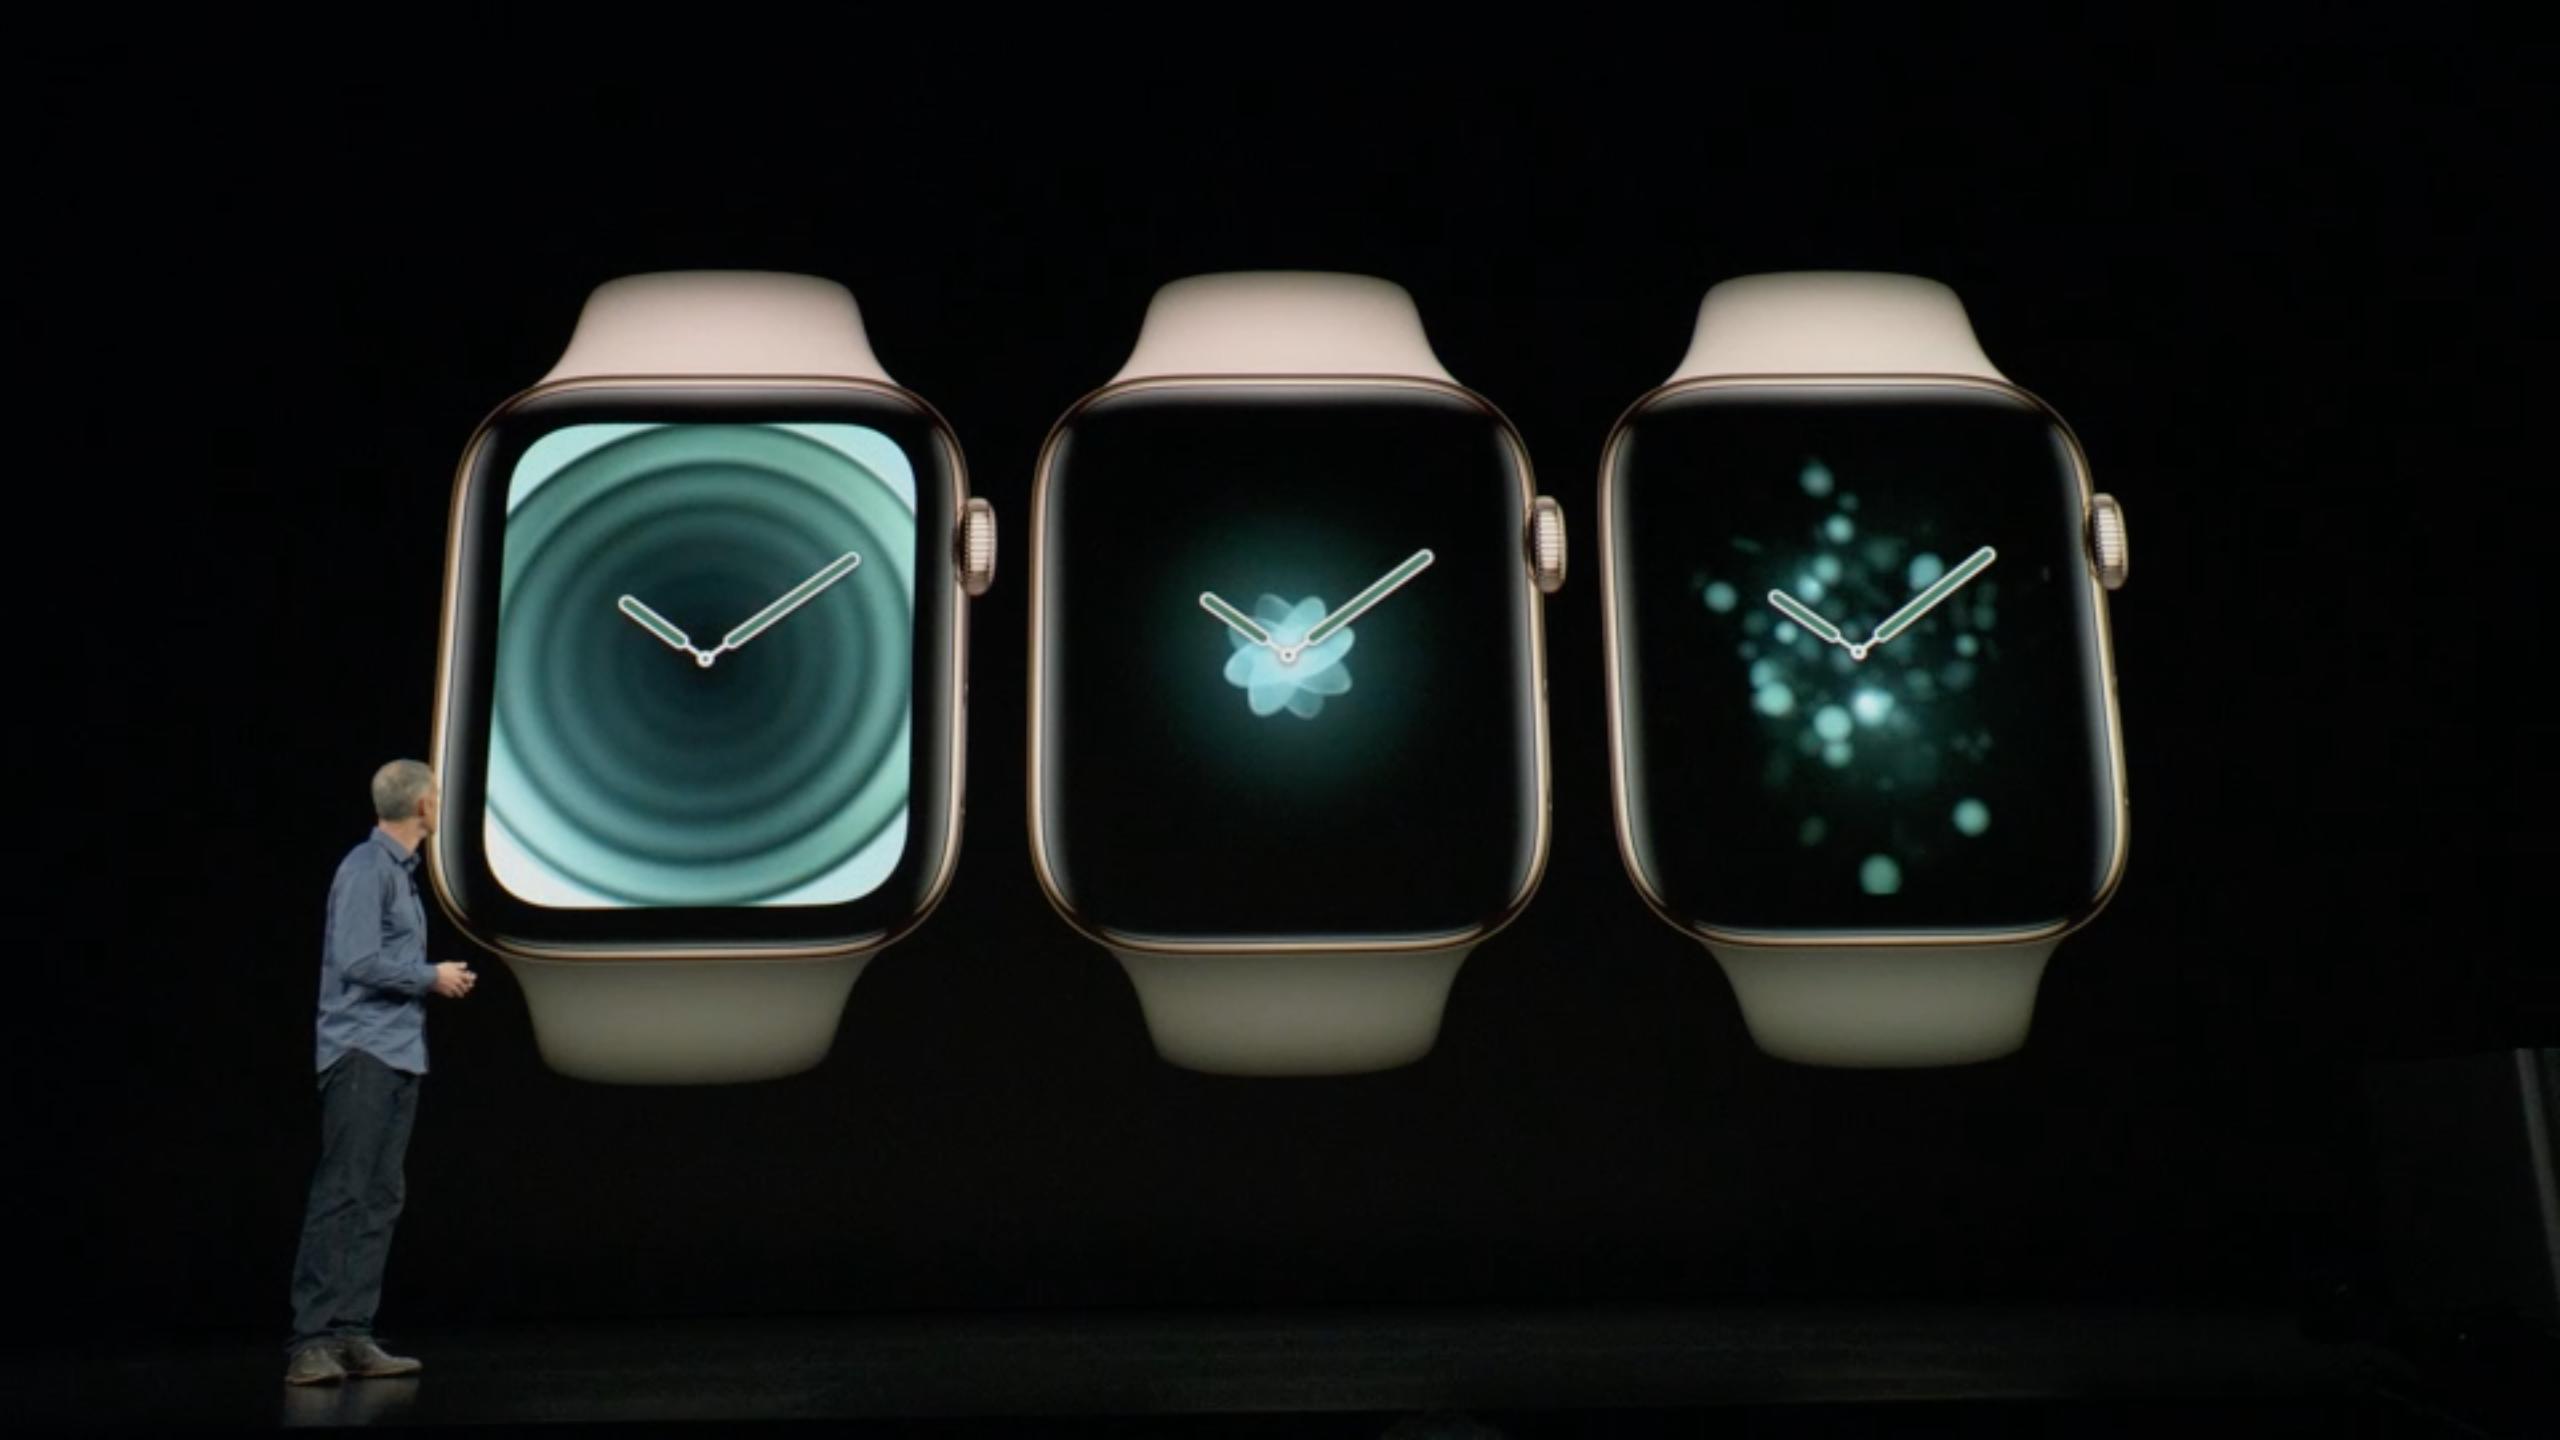 2560 x 1440 · png - Apple introduces the Apple Watch Series 4, includes new watch faces